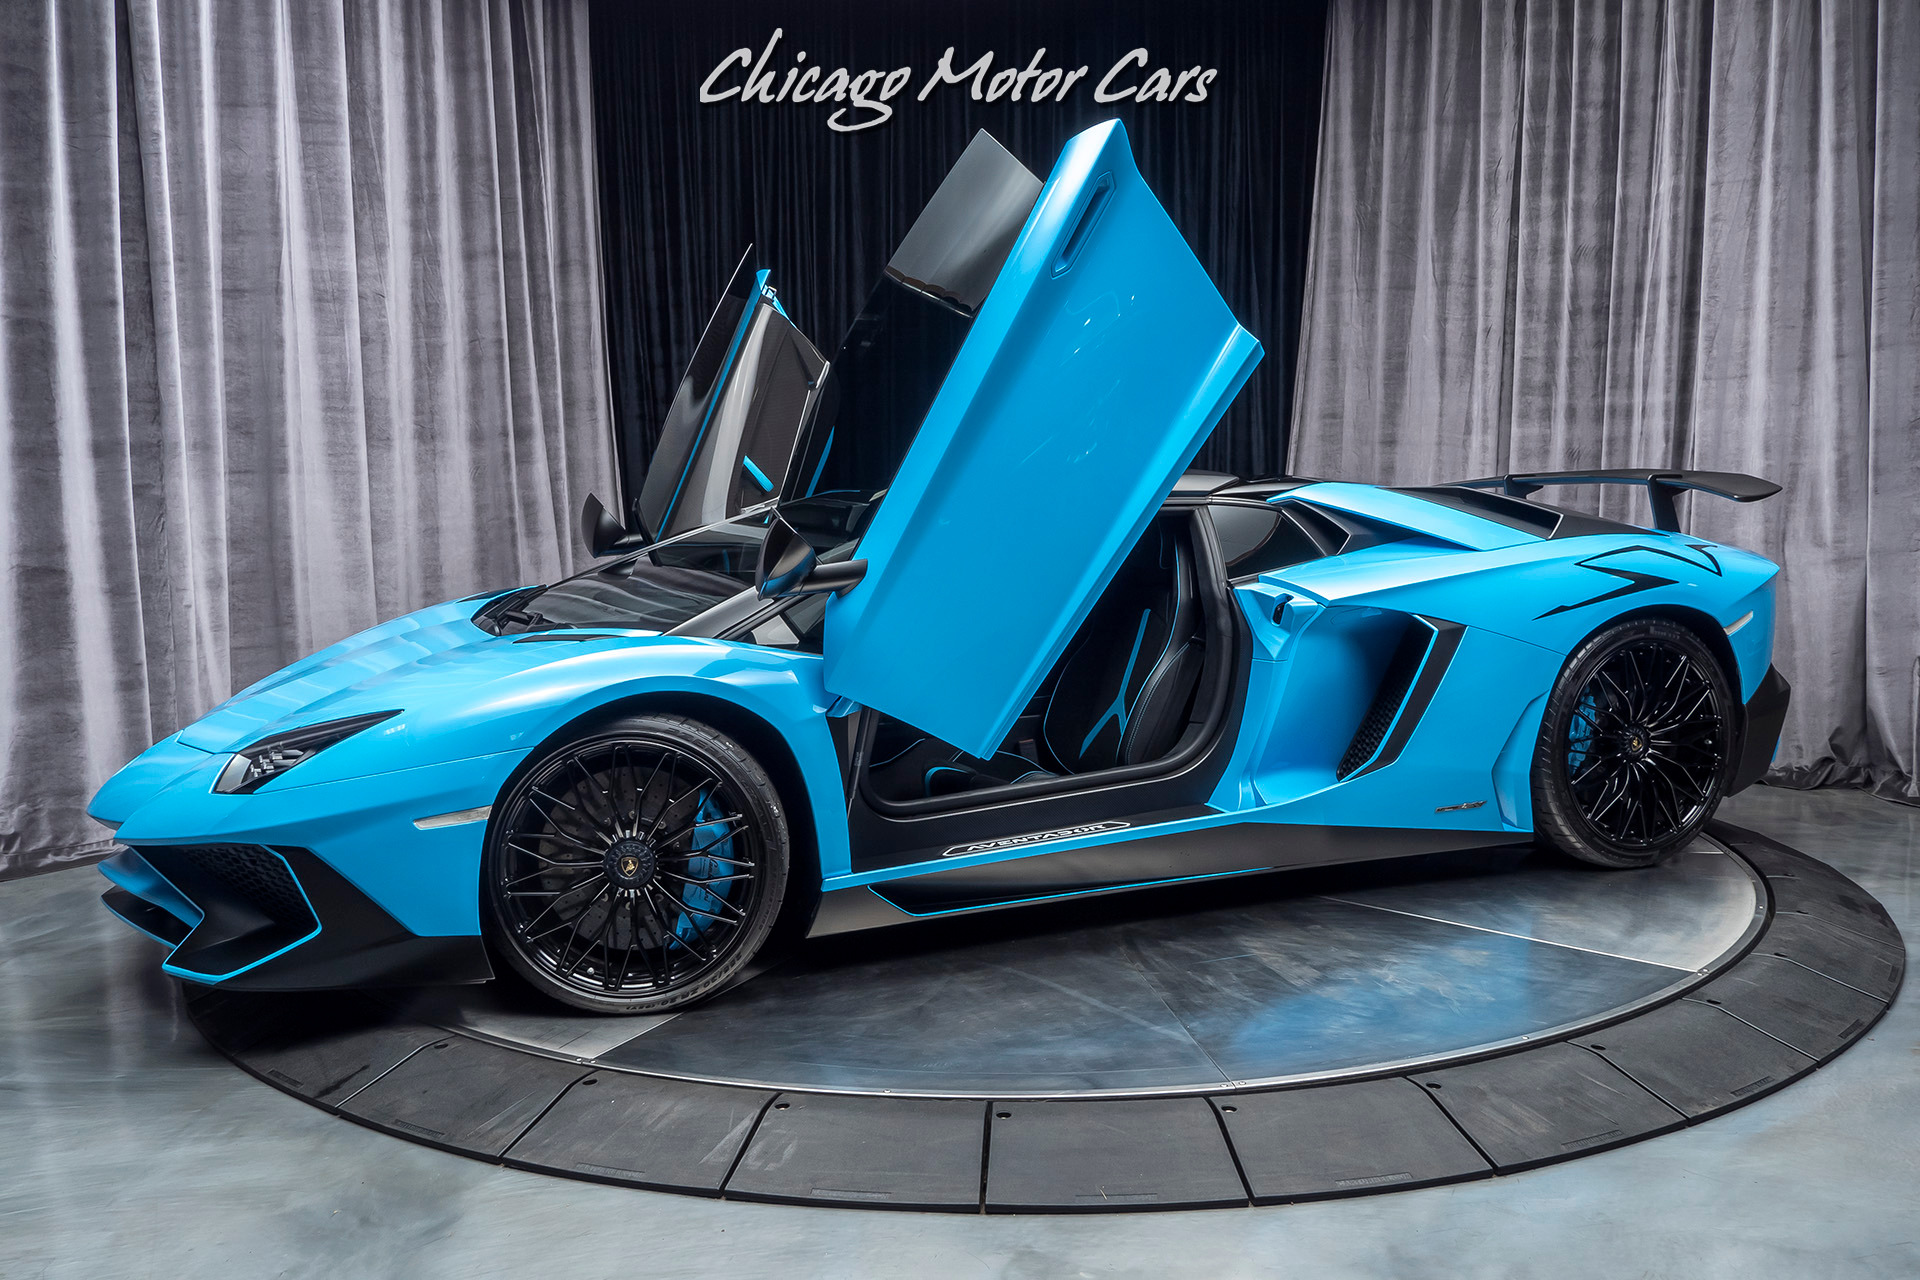 Used 17 Lamborghini Aventador Lp750 4 Sv Roadster Upgraded Exhaust Radar Serviced Perfect Over 601k New For Sale Special Pricing Chicago Motor Cars Stock